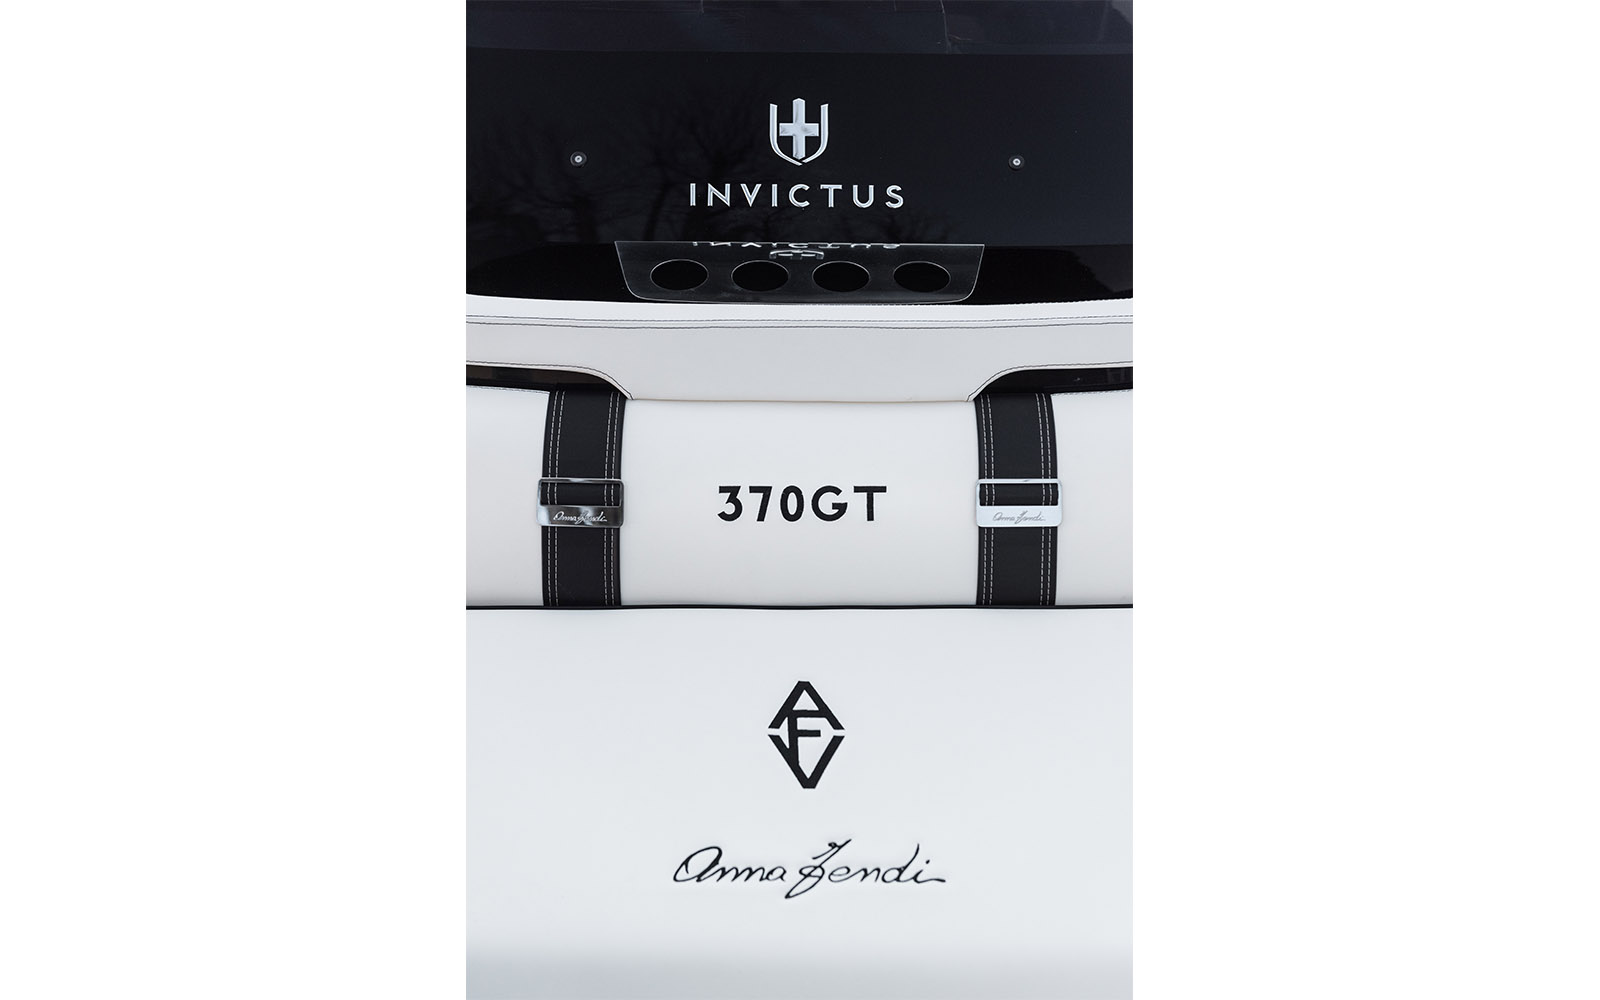 barco Invictus Yacht - boat shopping